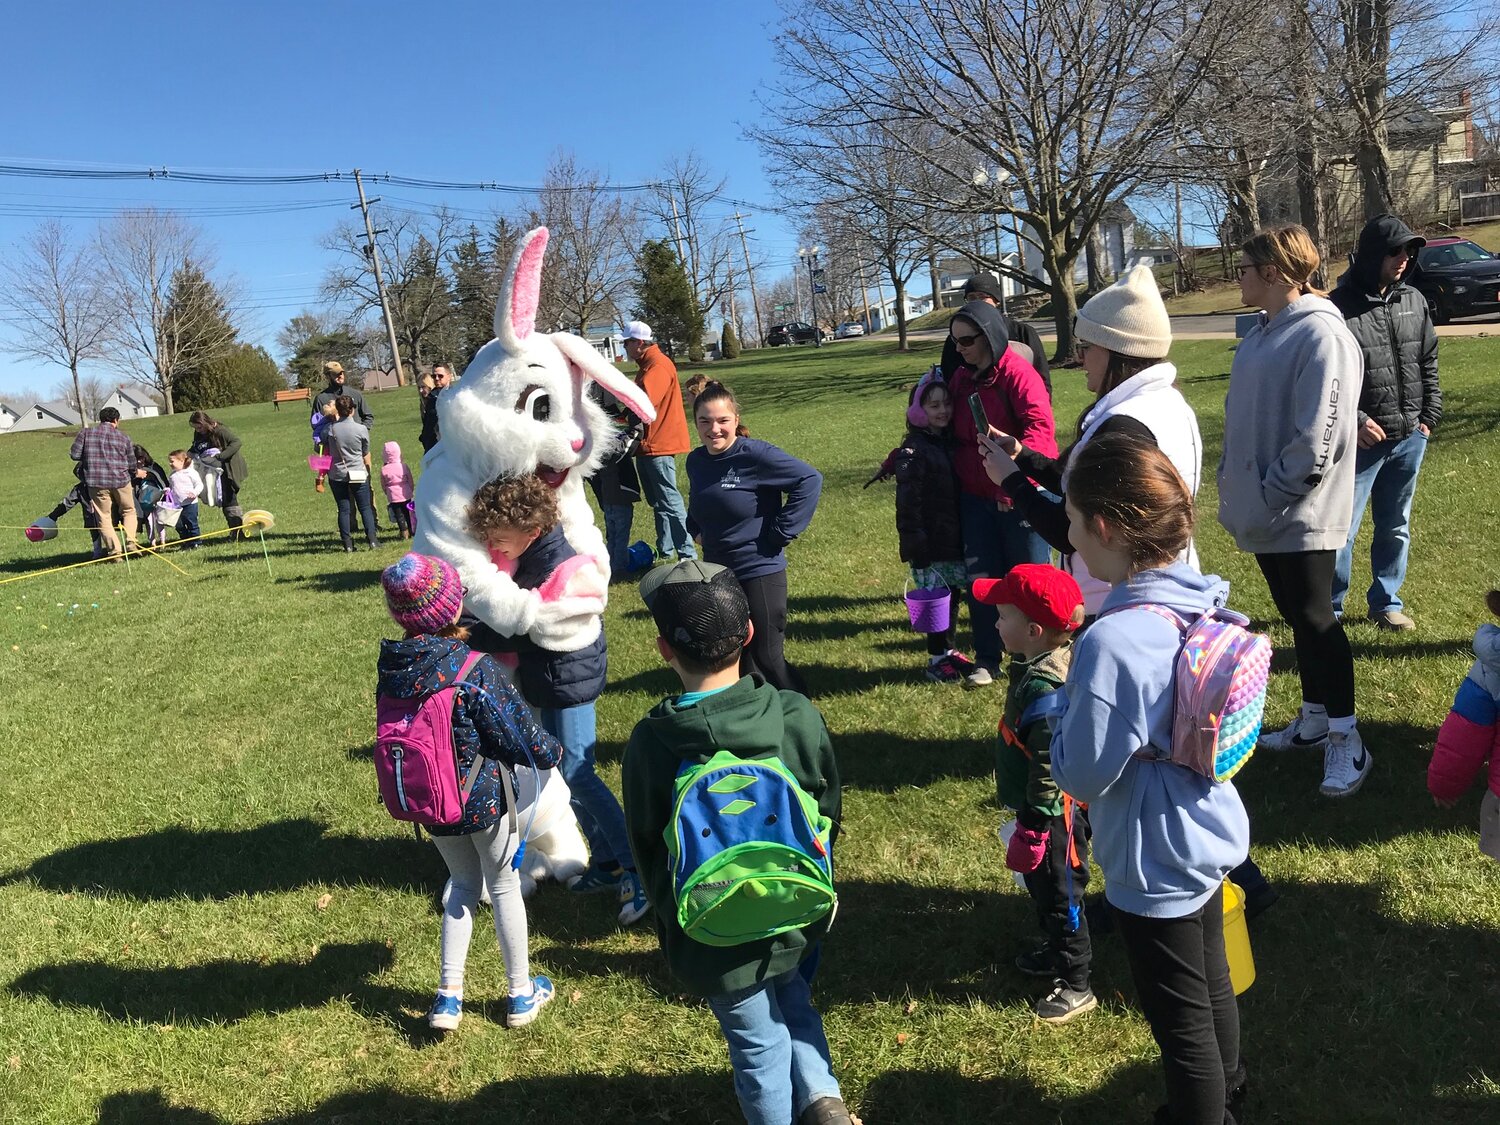 Hop the Bunny greets children Saturday, April 8 during the annual Easter Egg Hunt in Sherrill.